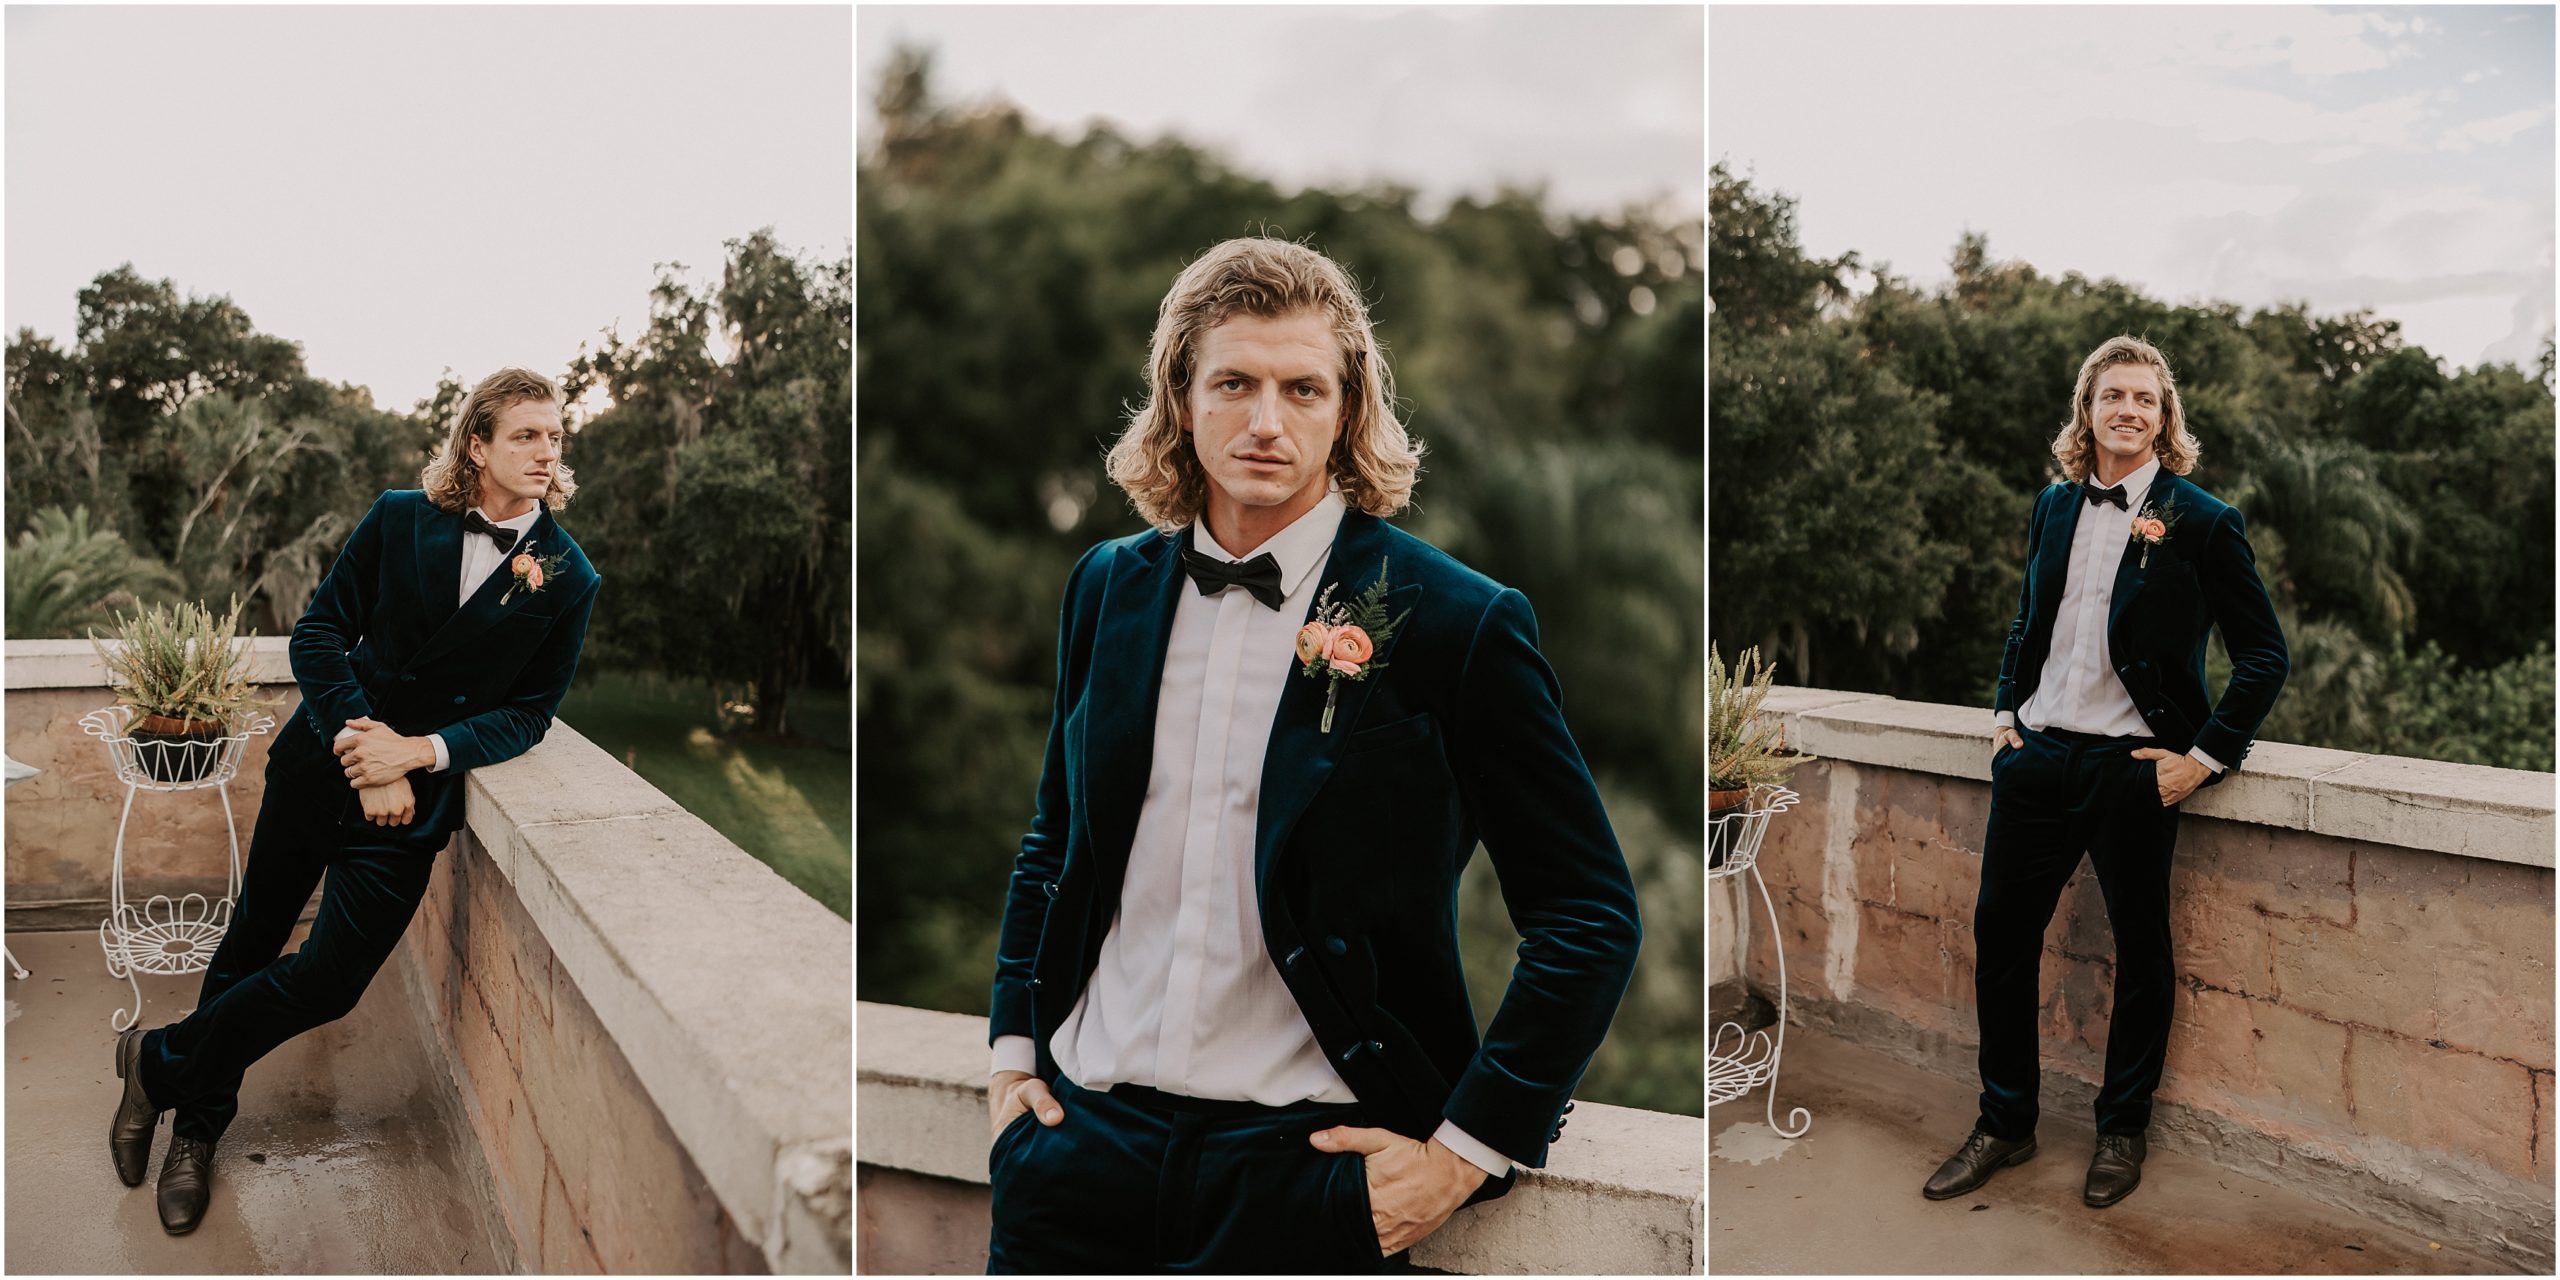 For our groom we opted for a a smart yet casual look. A velvet suit of dark blue tone, combined with a crisp white shirt, black bow tie and grey shoes. Keith wore a boutonniere with the same mix were made for the bouquet and for the floral decoration of the table setting. 